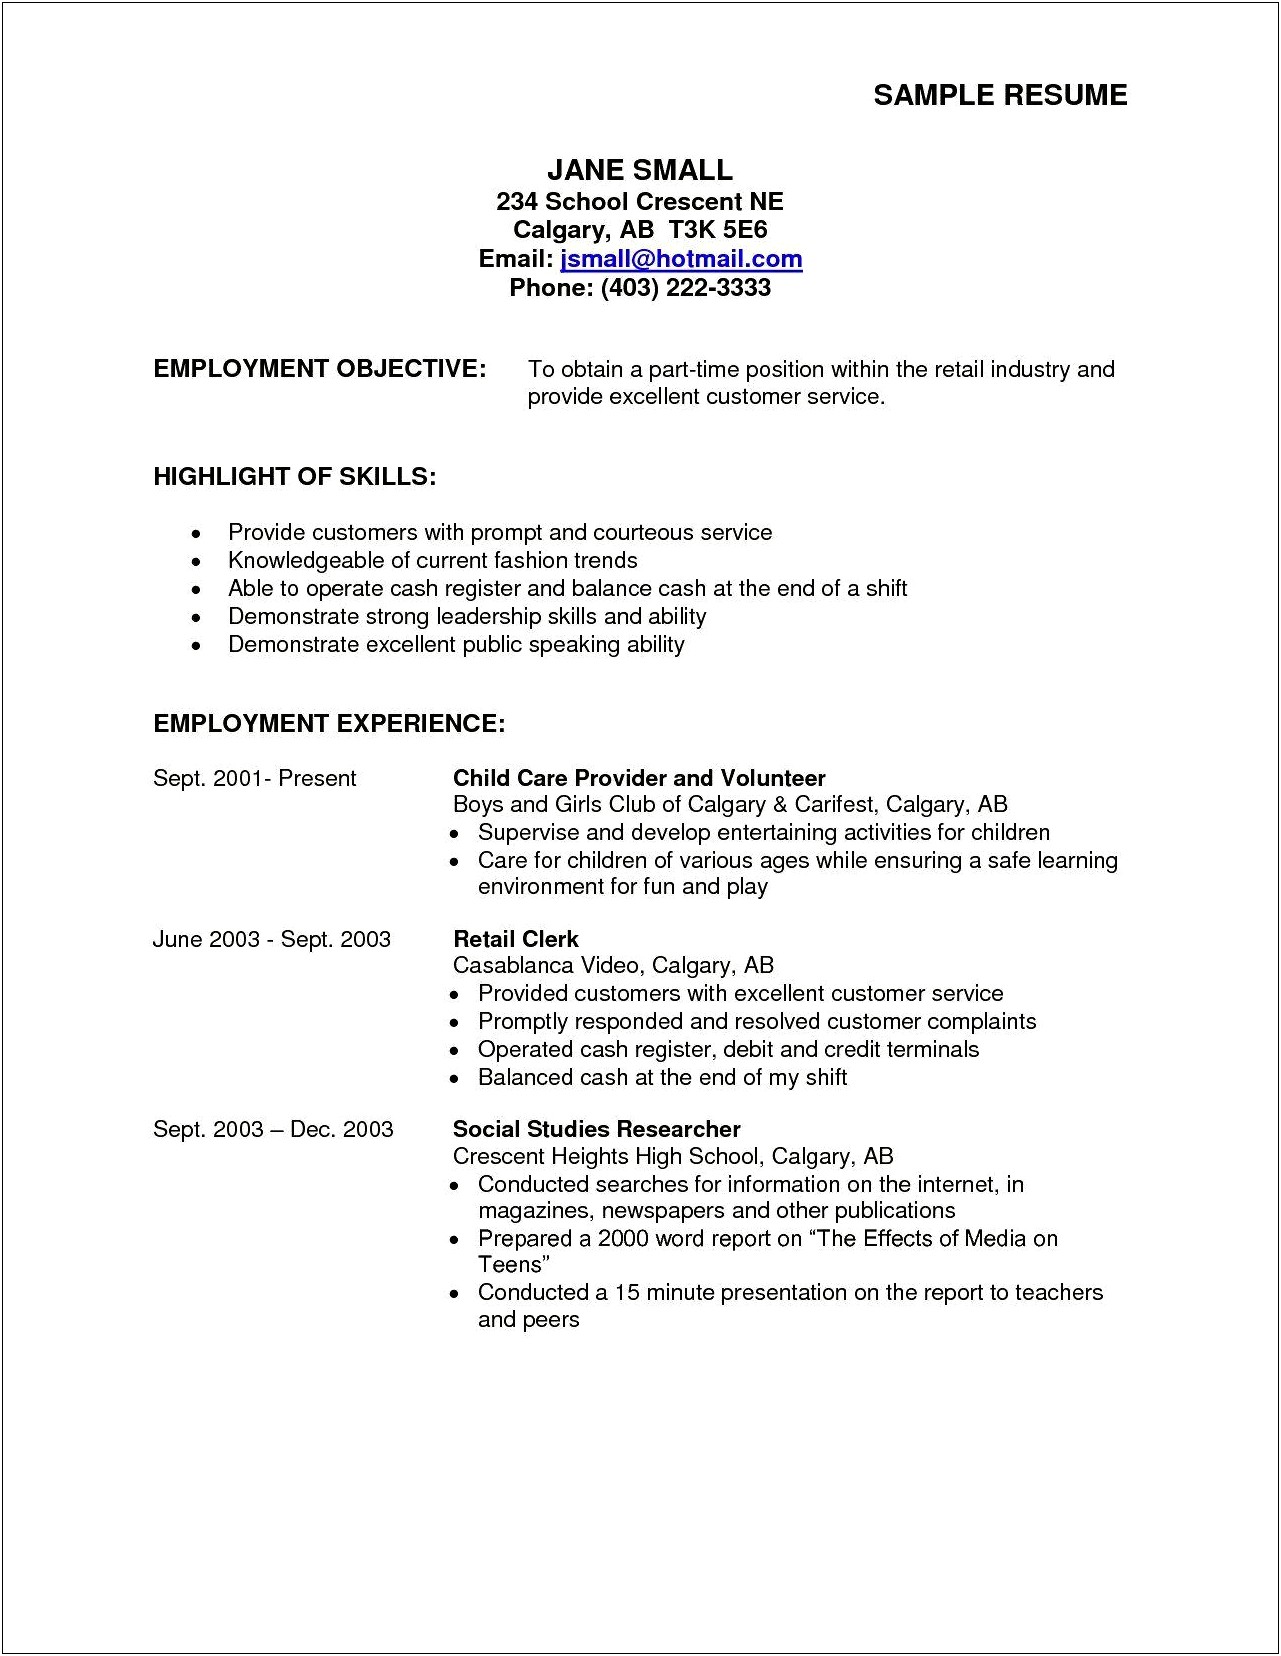 Resume Objective For Part Time Job College Student